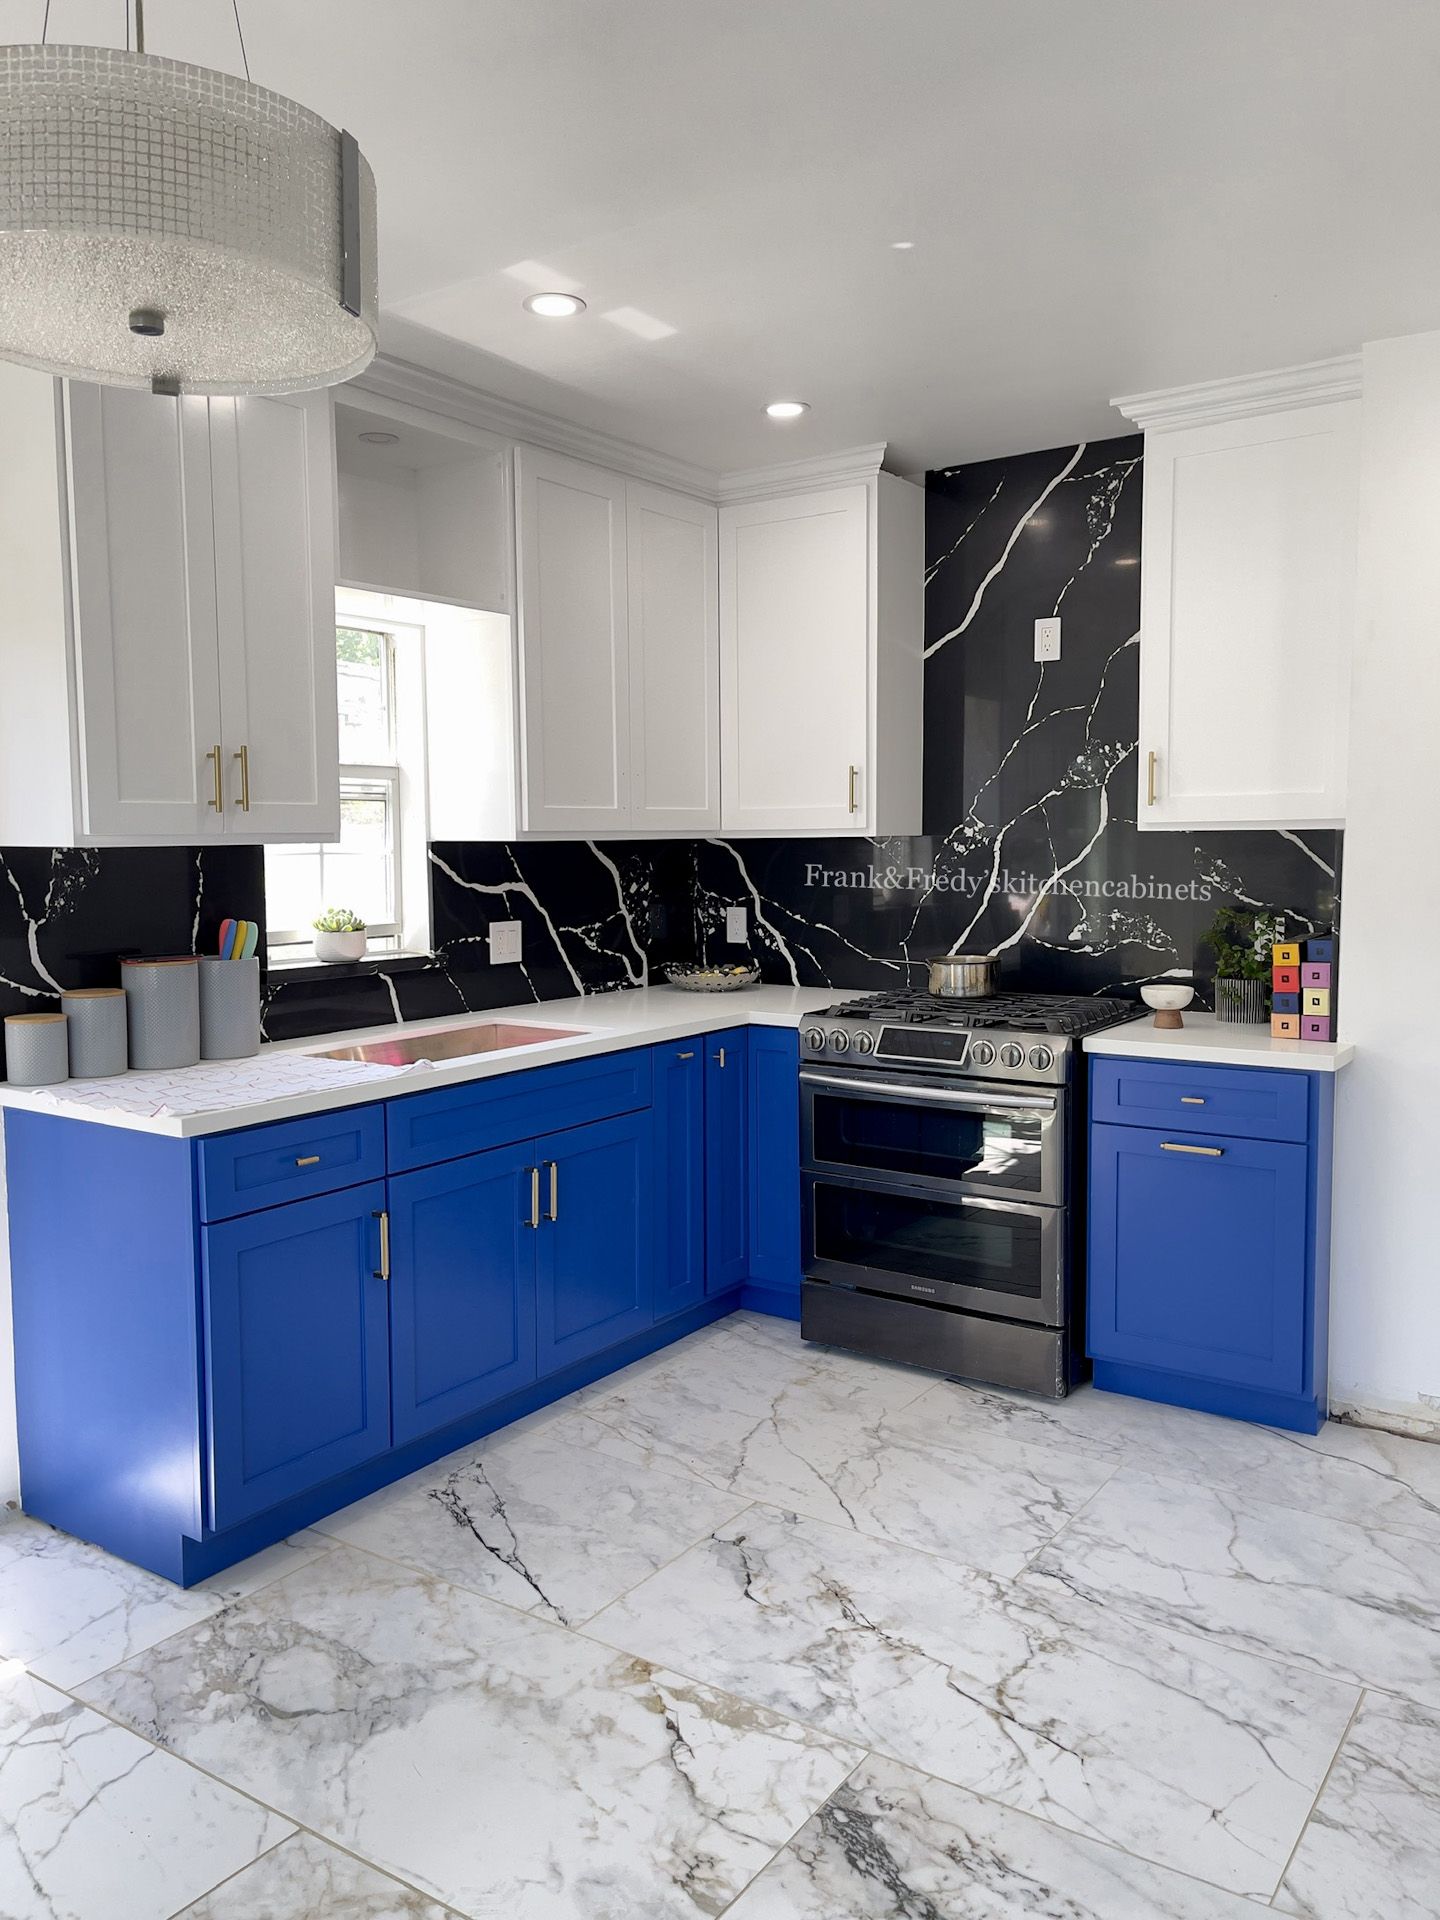 A kitchen with blue cabinets and white counter tops.